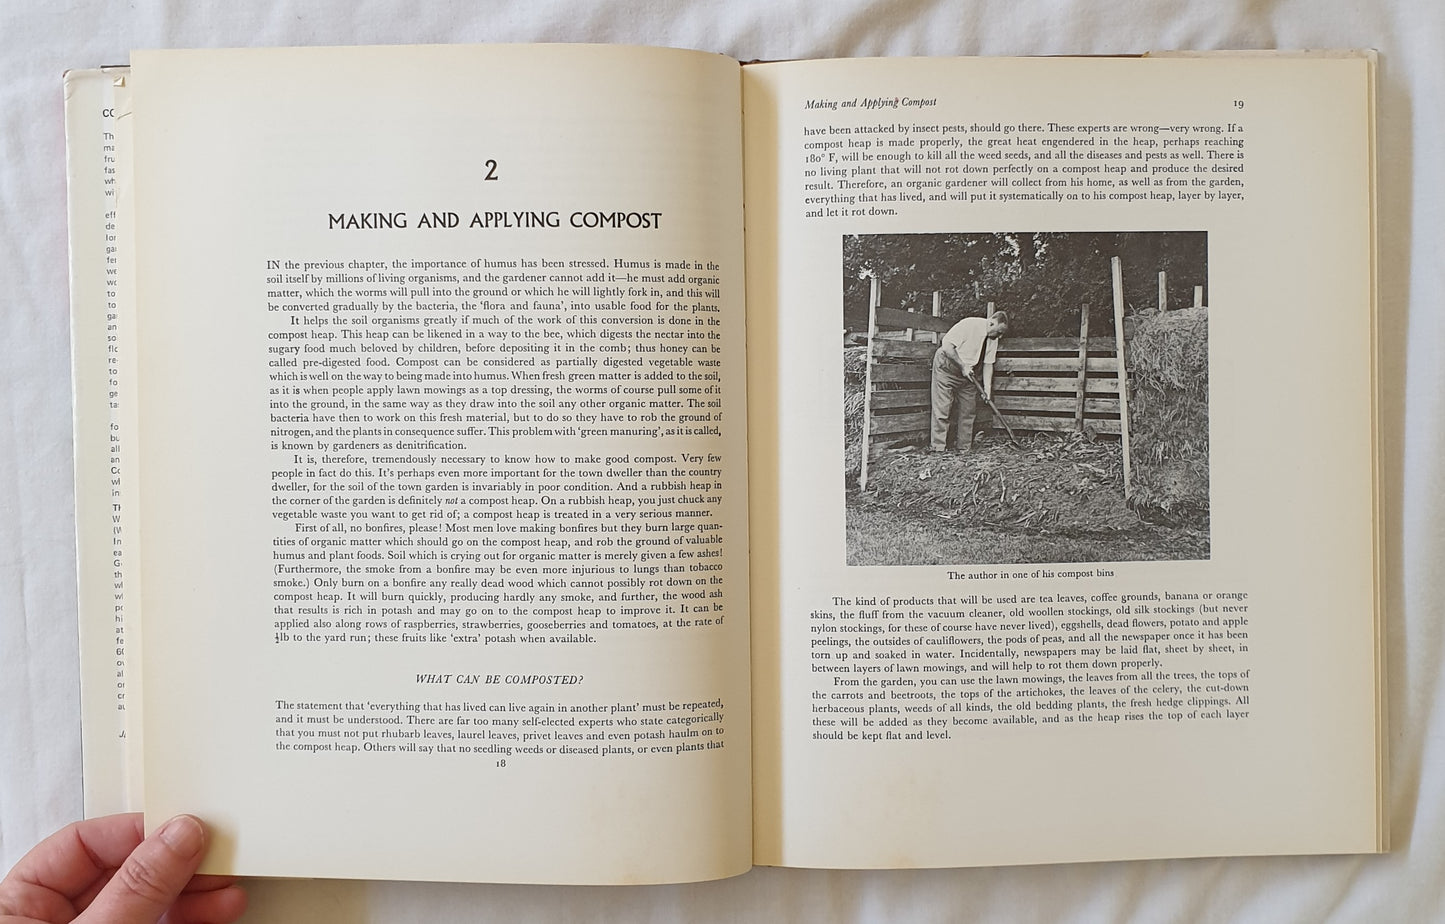 Compost Gardening by W. E. Shewell-Cooper